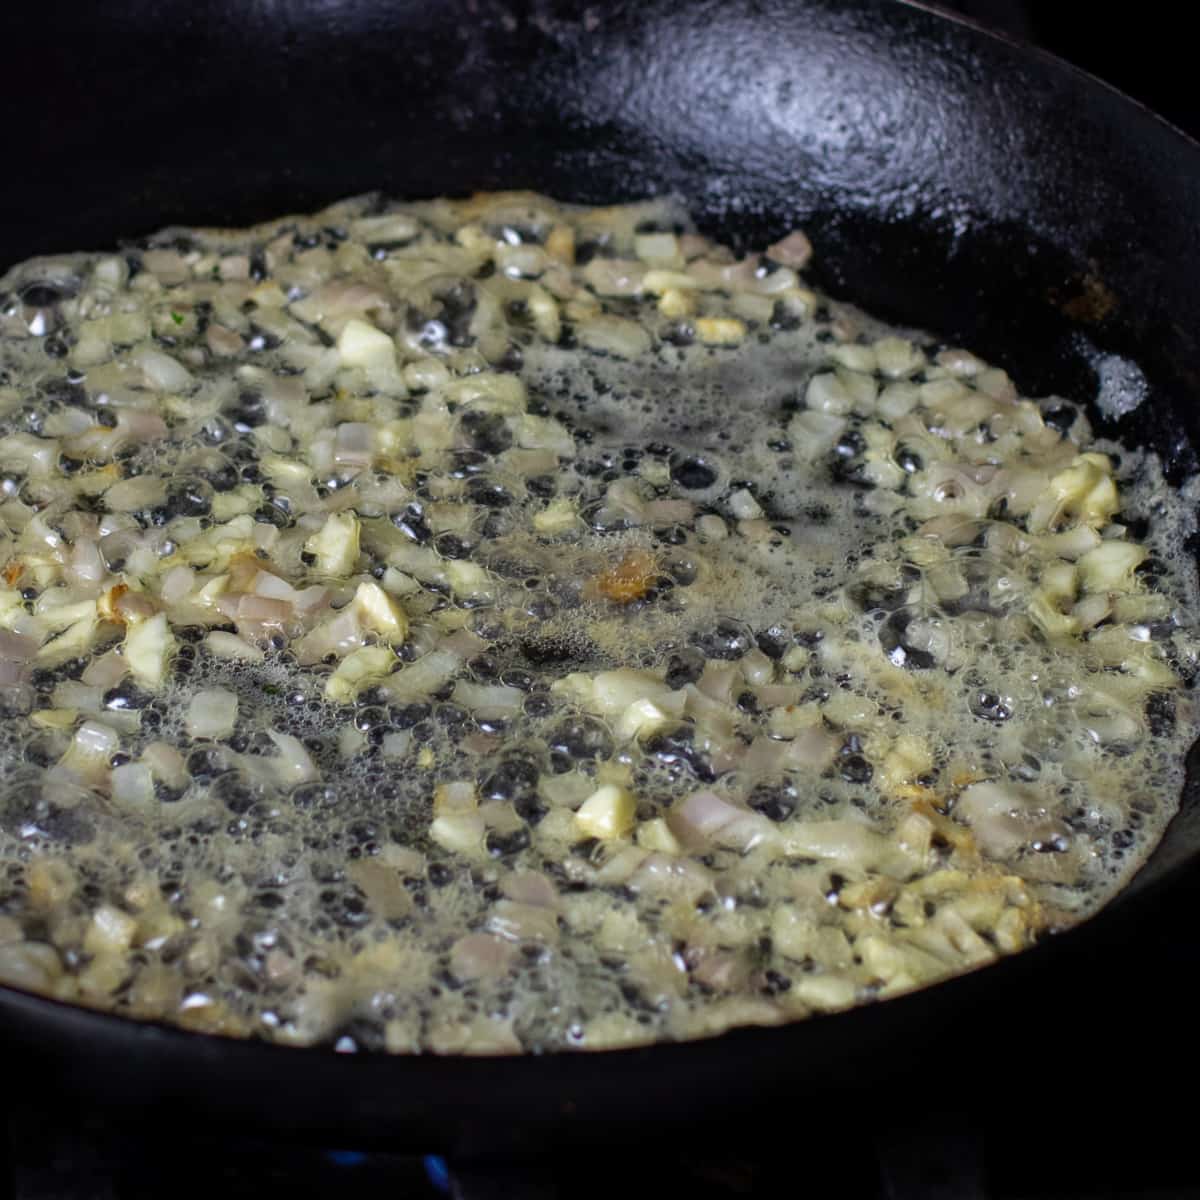 A minced shallot and garlic sautéing in a frying pan.